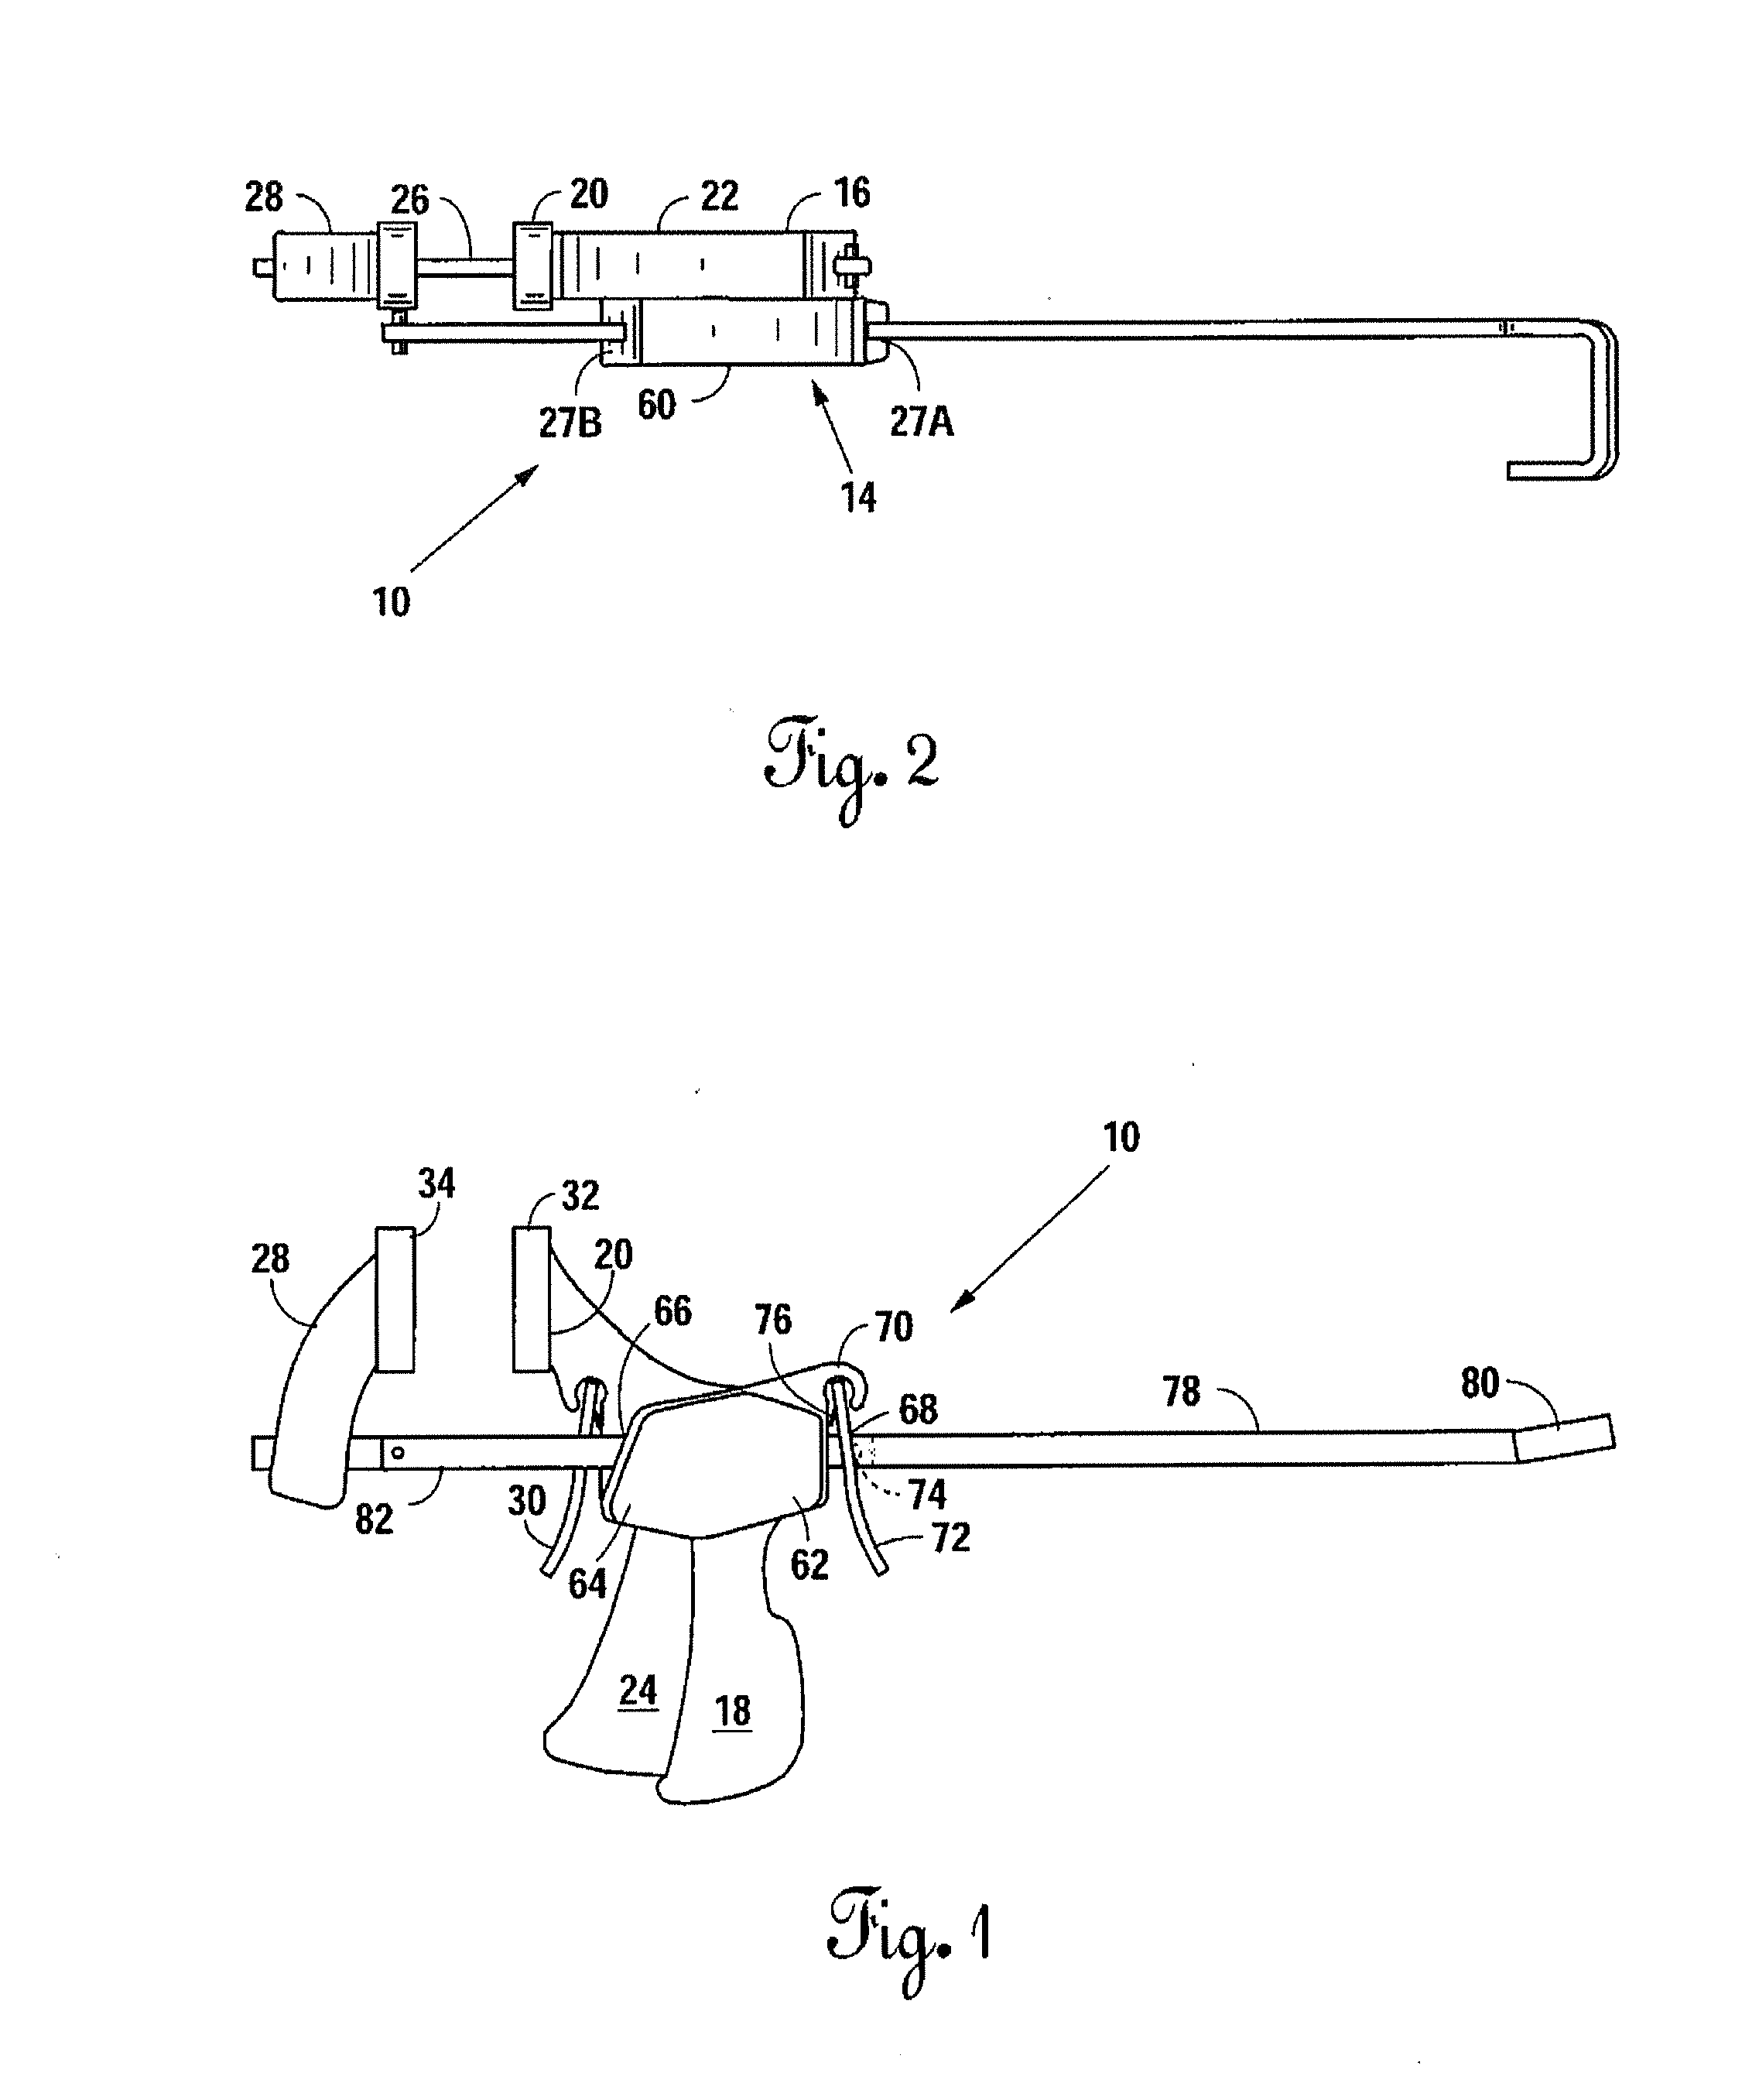 Ladder safety device having a building clamp assembly and a ladder hook assembly